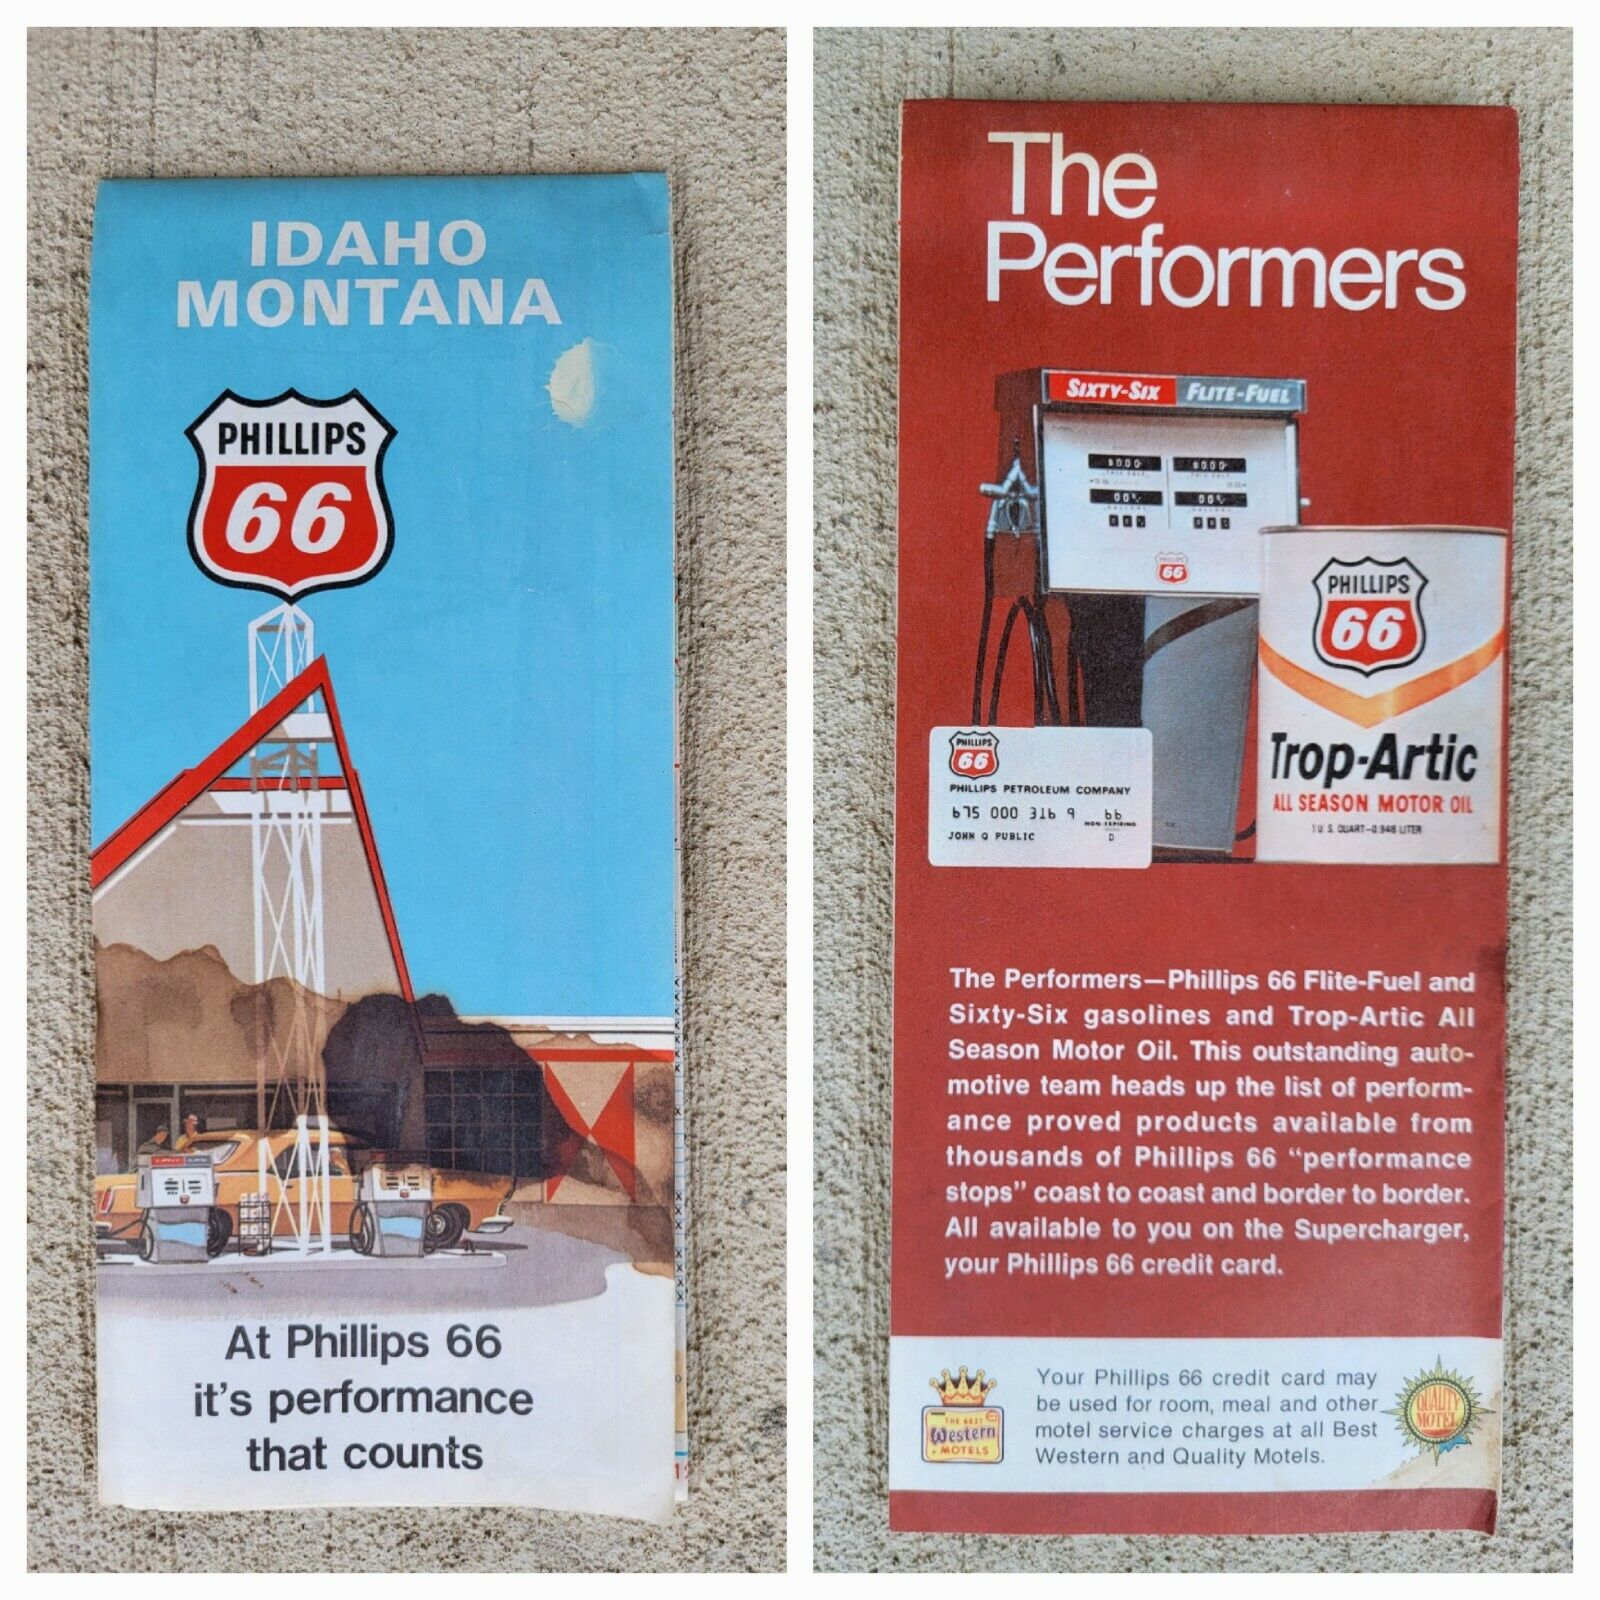 VTG 1970 Phillips 66 Road Map Idaho Montana Fold-Out with Attractions Imperfect